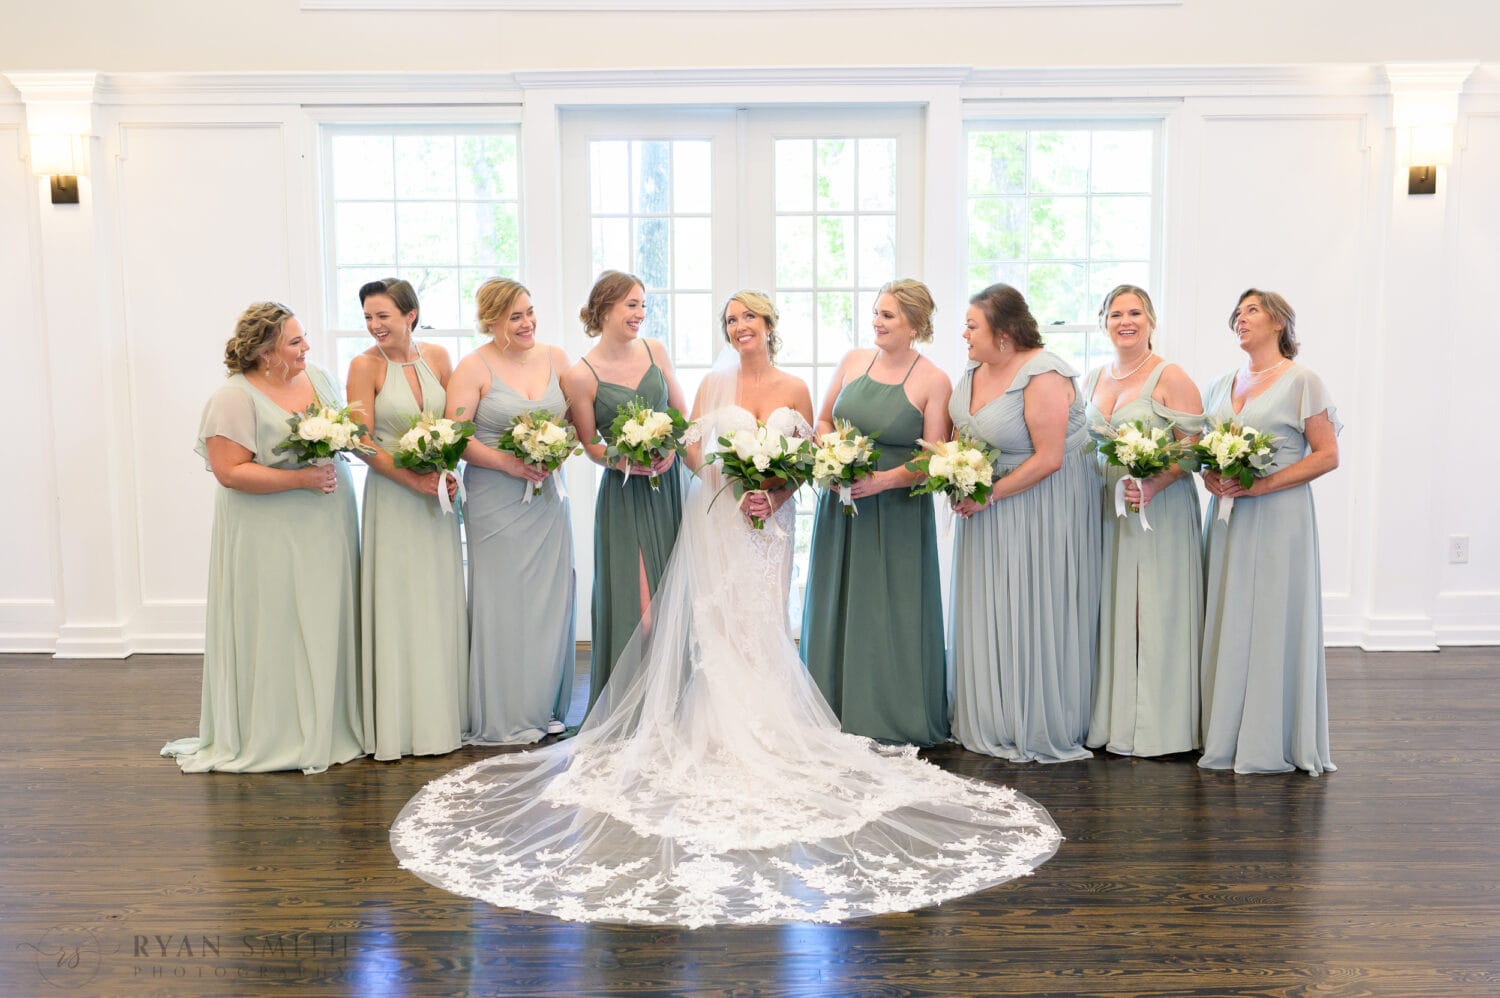 Bride and bridesmaids before the ceremony - The Village House at Litchfield